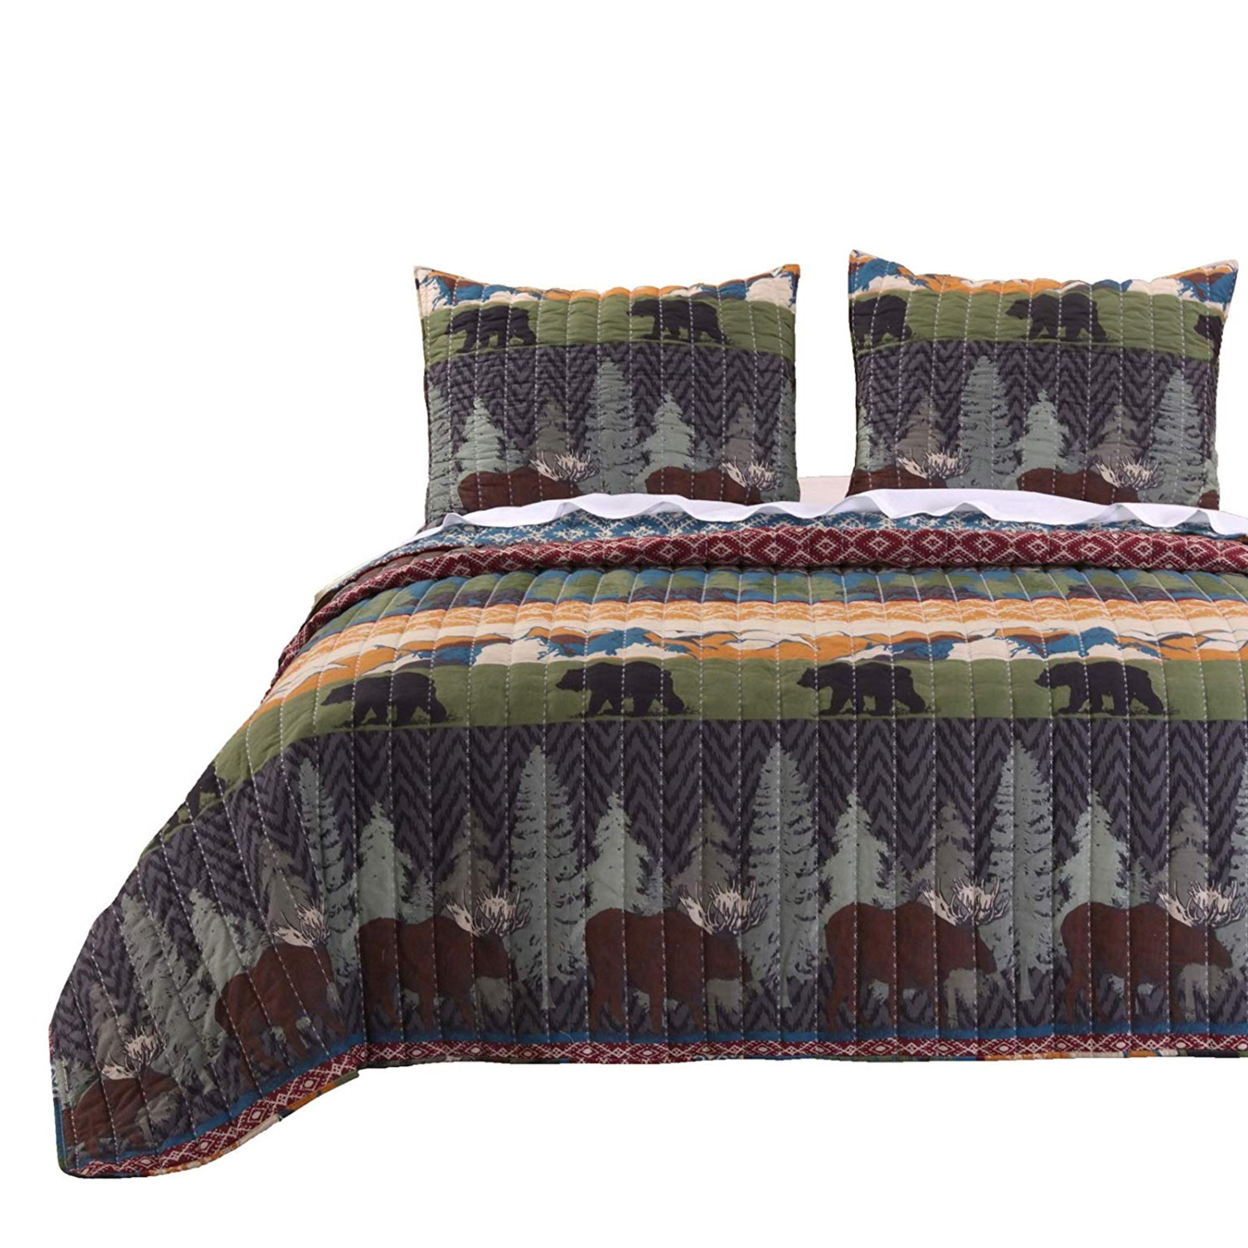 2 Piece Twin Size Quilt Set With Nature Inspired Print, Multicolor- Saltoro Sherpi